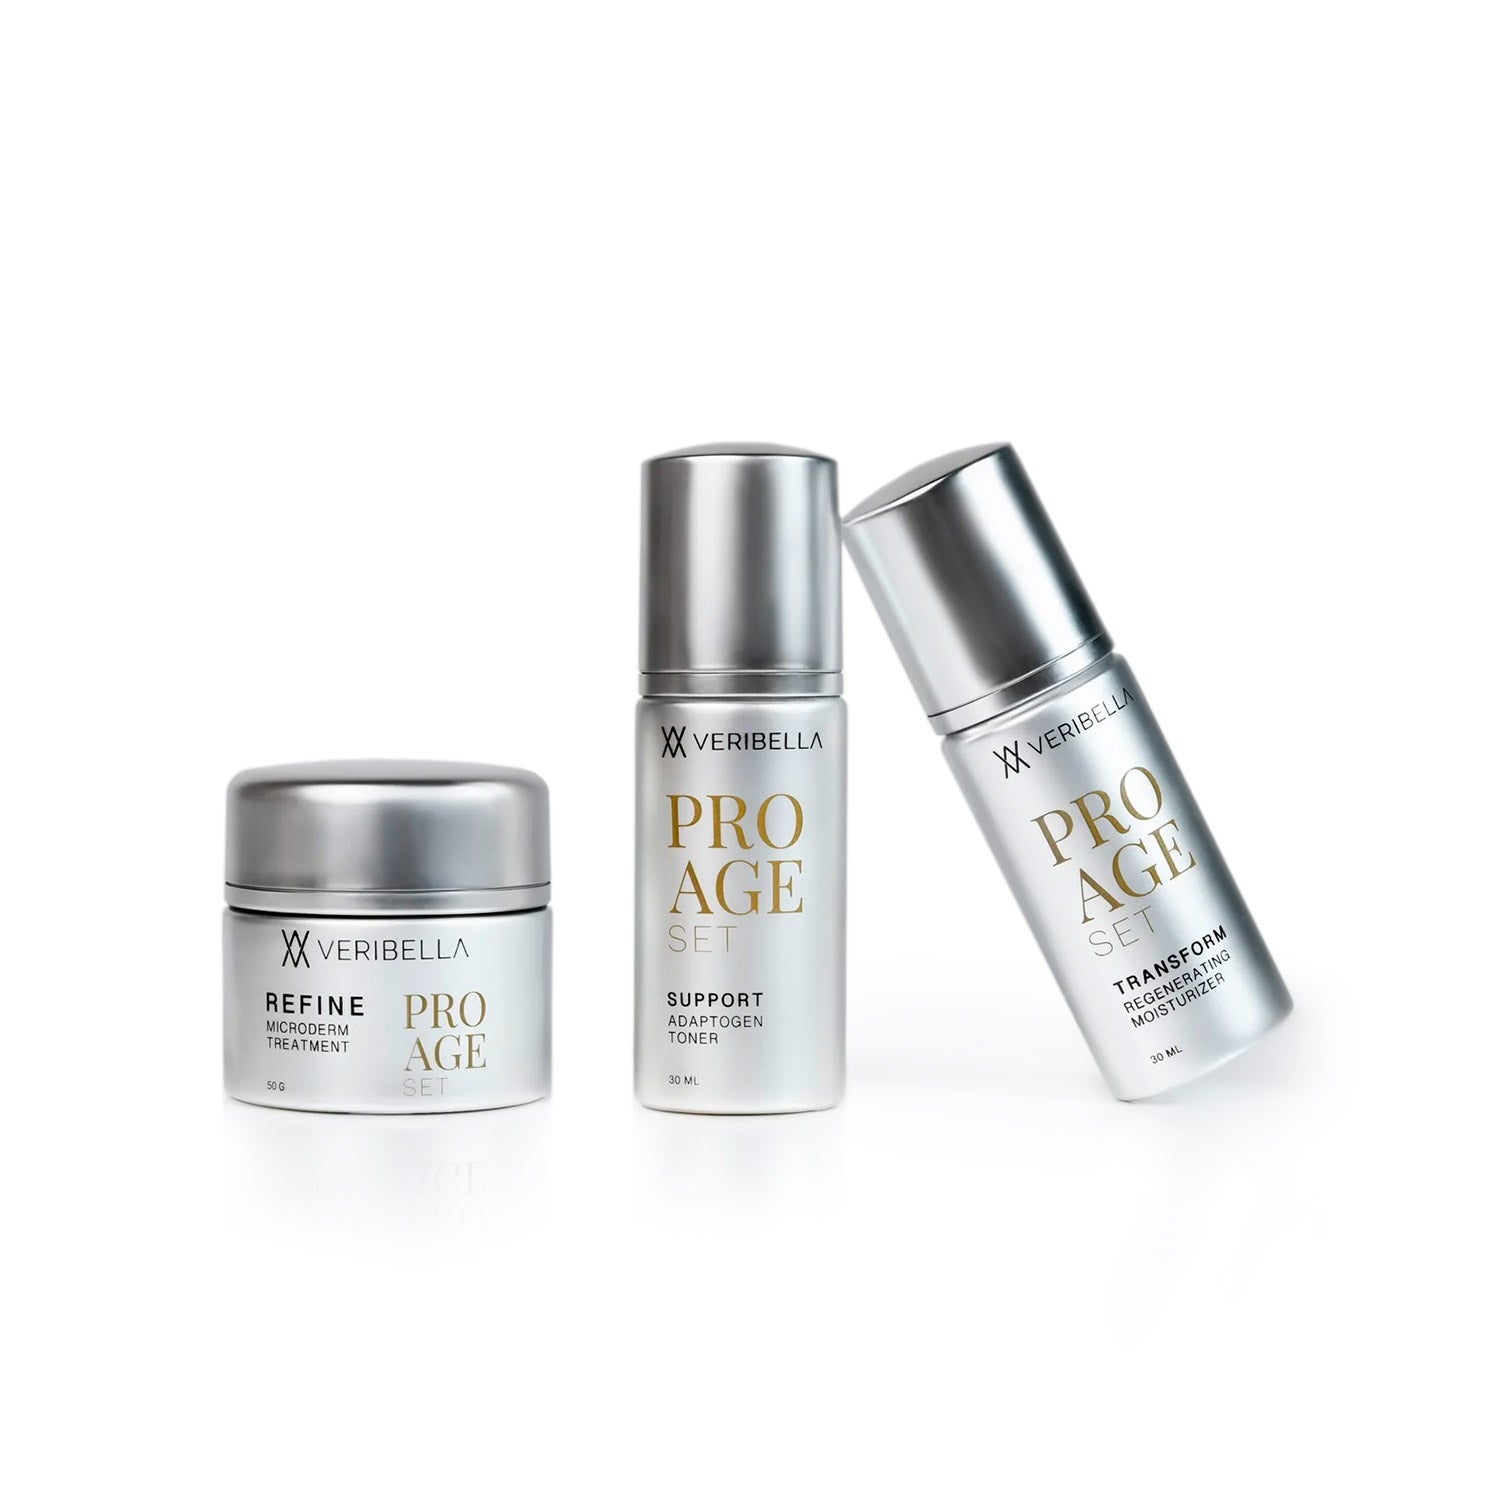 All products in Pro Age Set